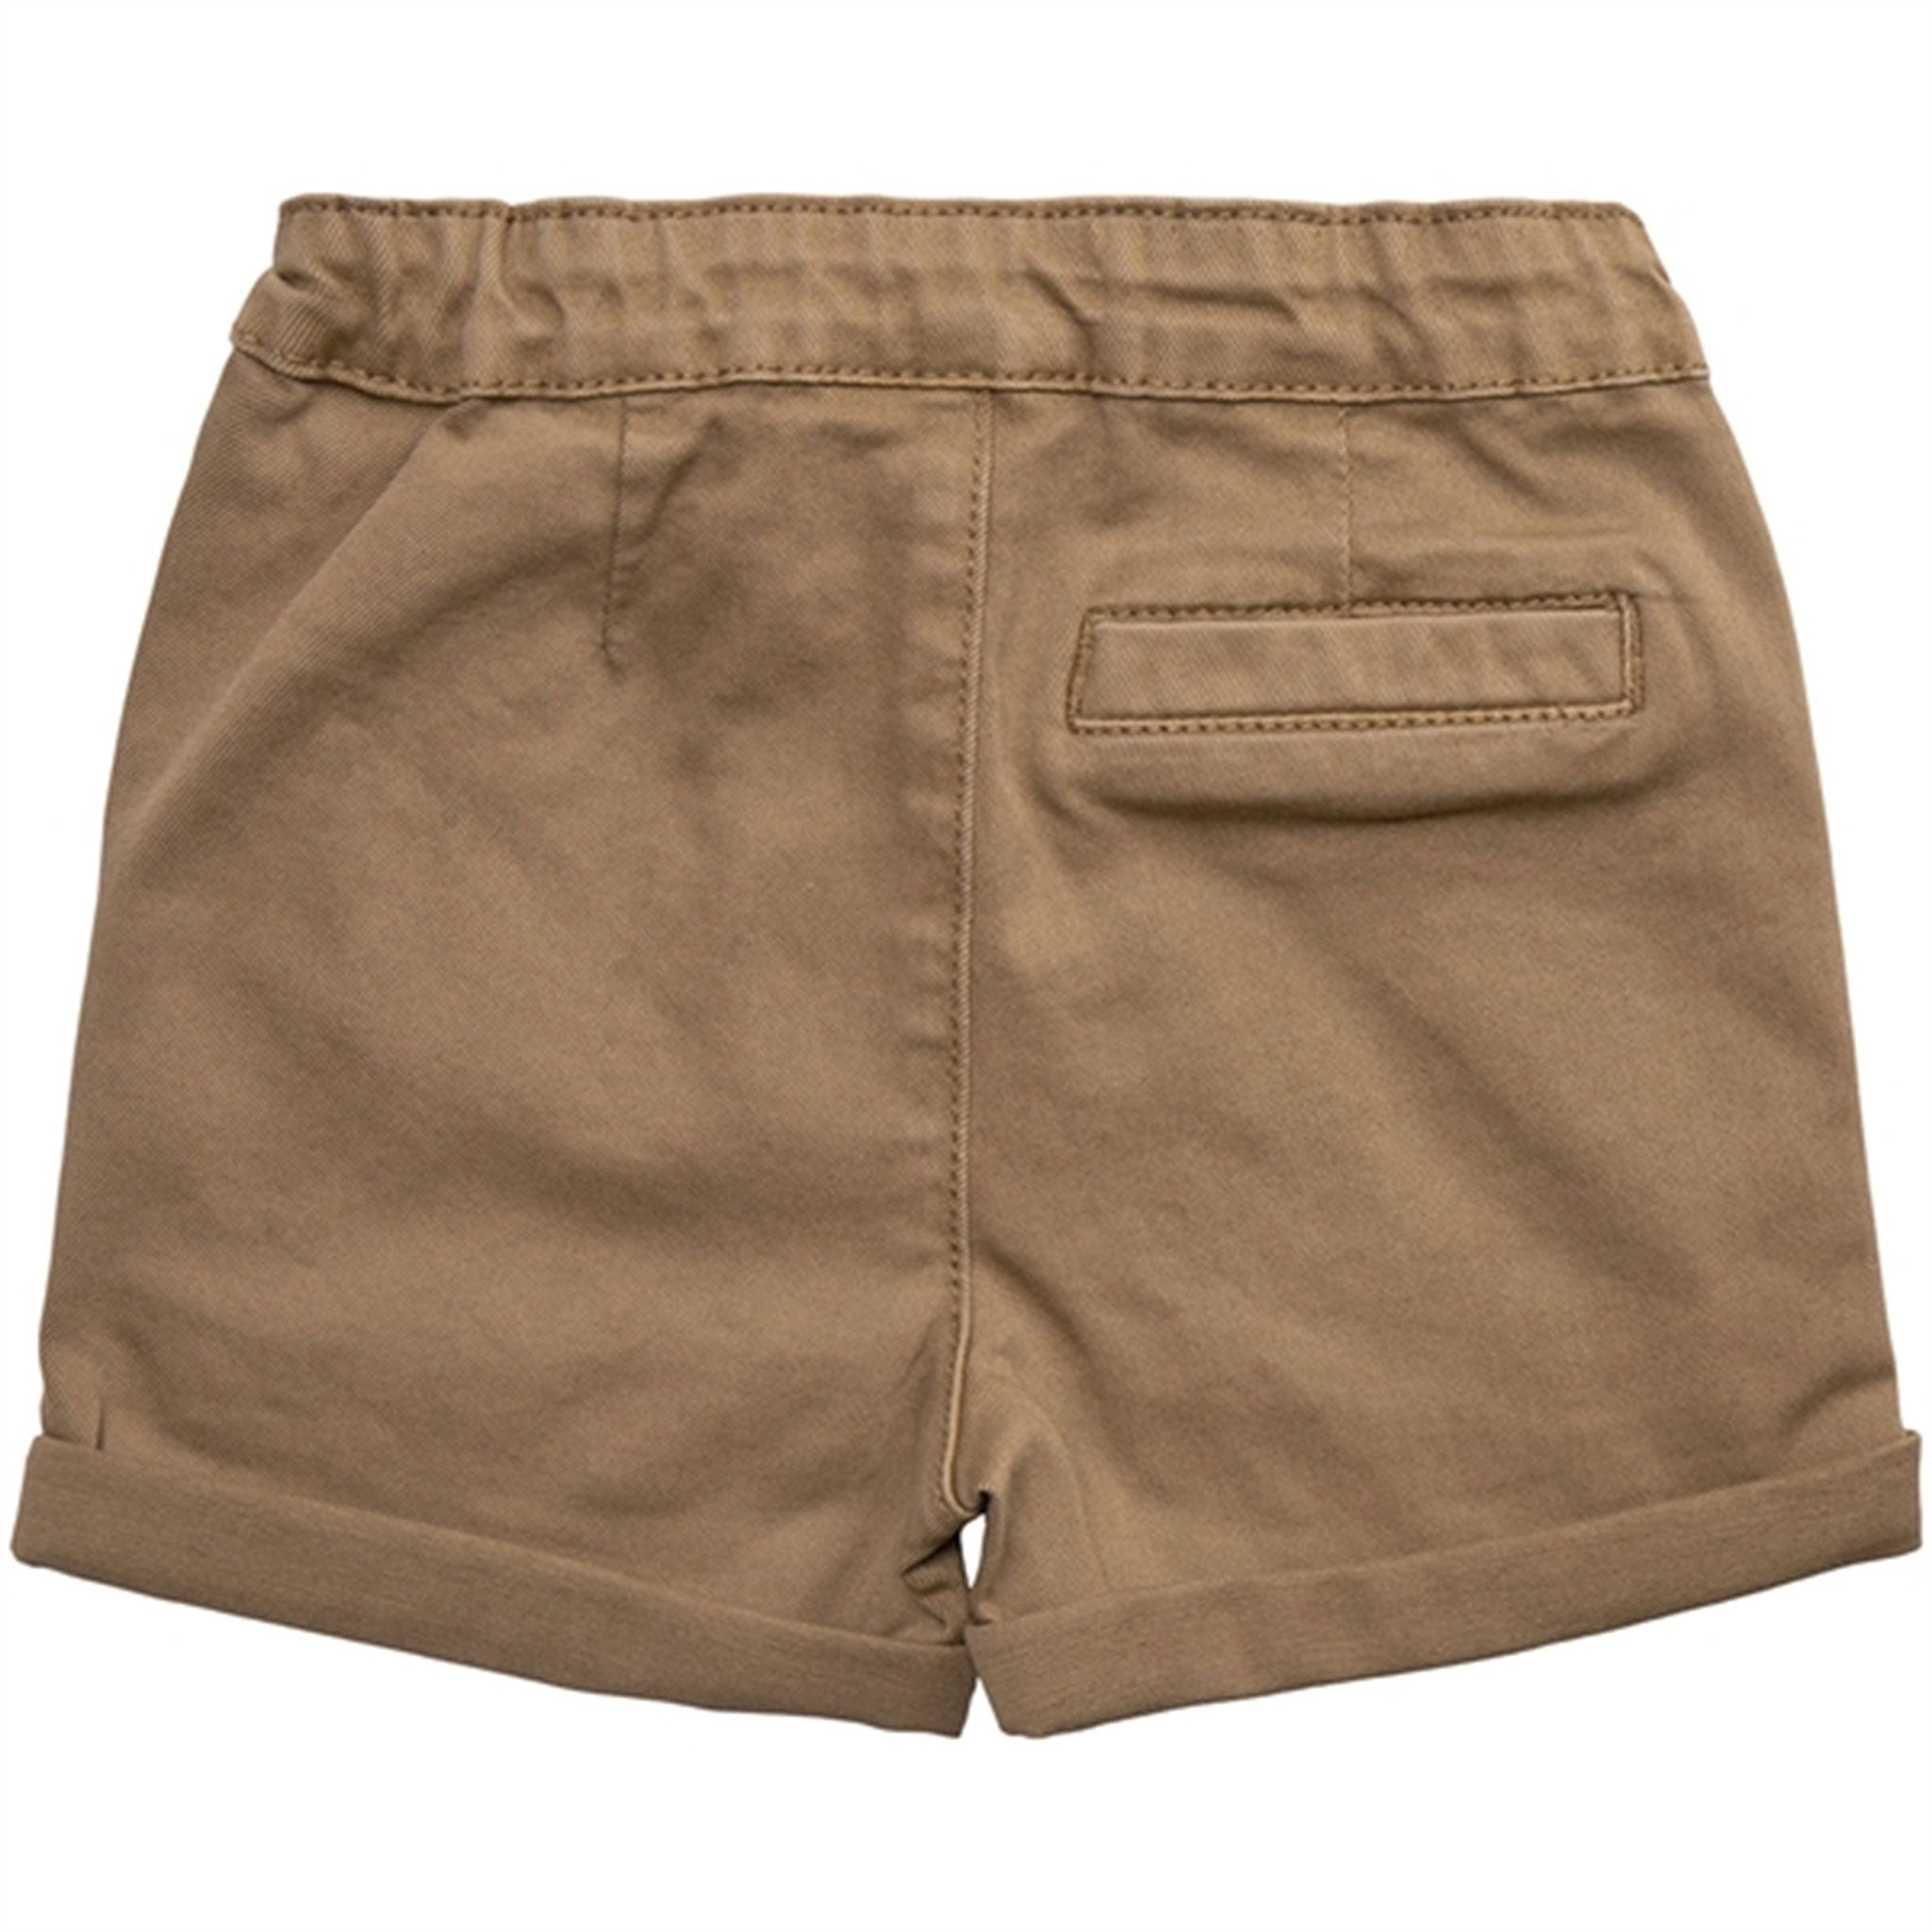 Petit by Sofie Schnoor Camel Shorts 9